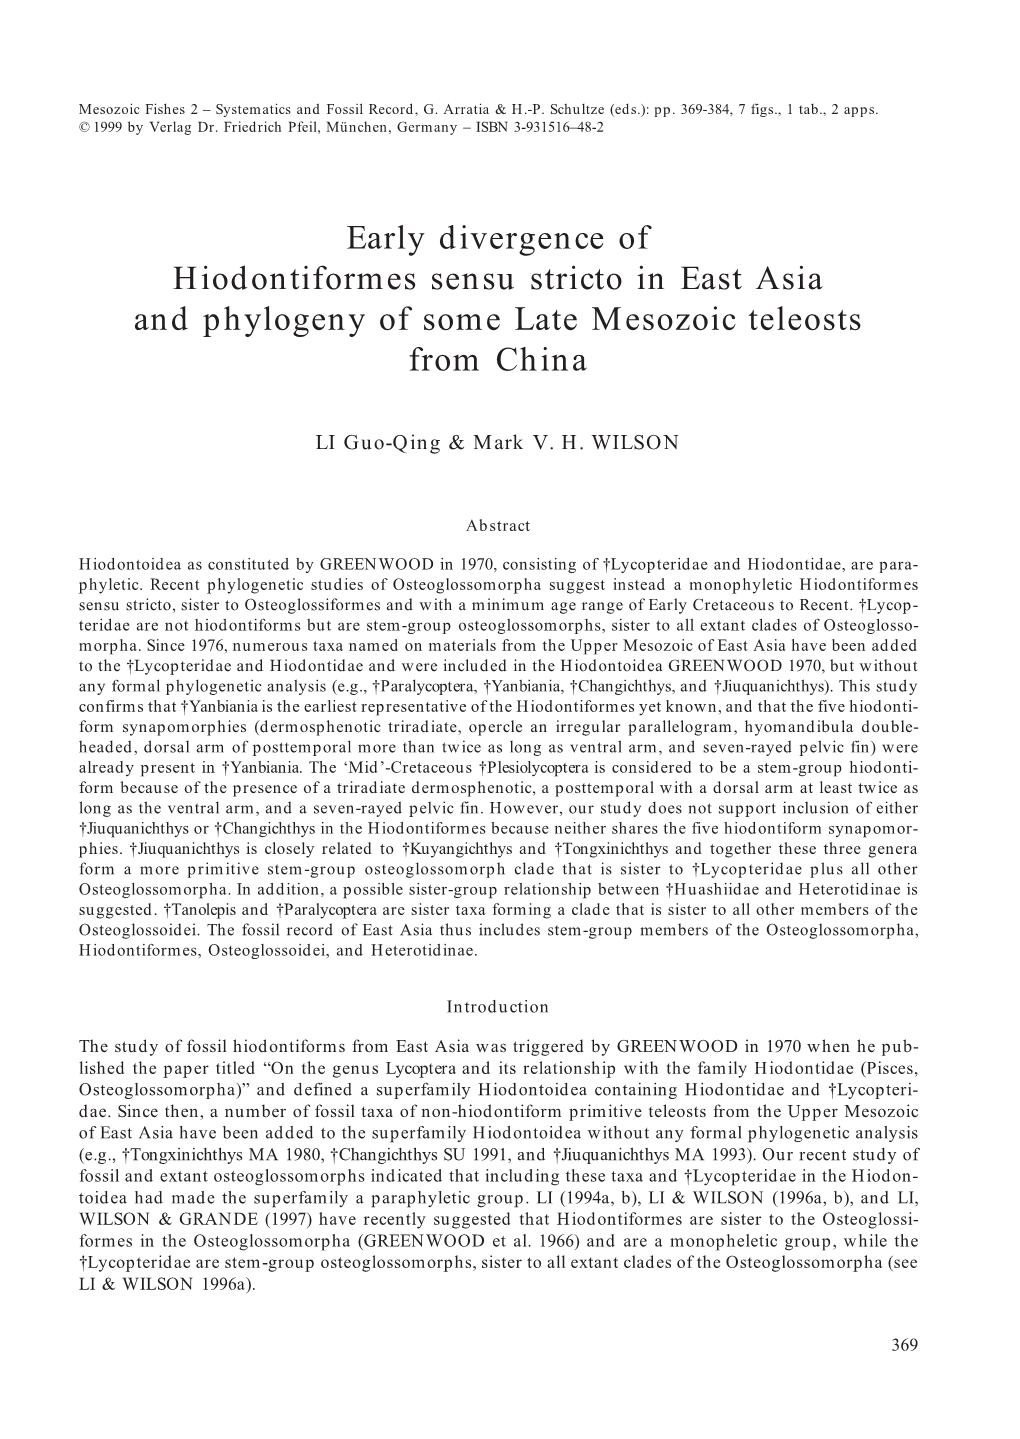 Early Divergence of Hiodontiformes Sensu Stricto in East Asia and Phylogeny of Some Late Mesozoic Teleosts from China